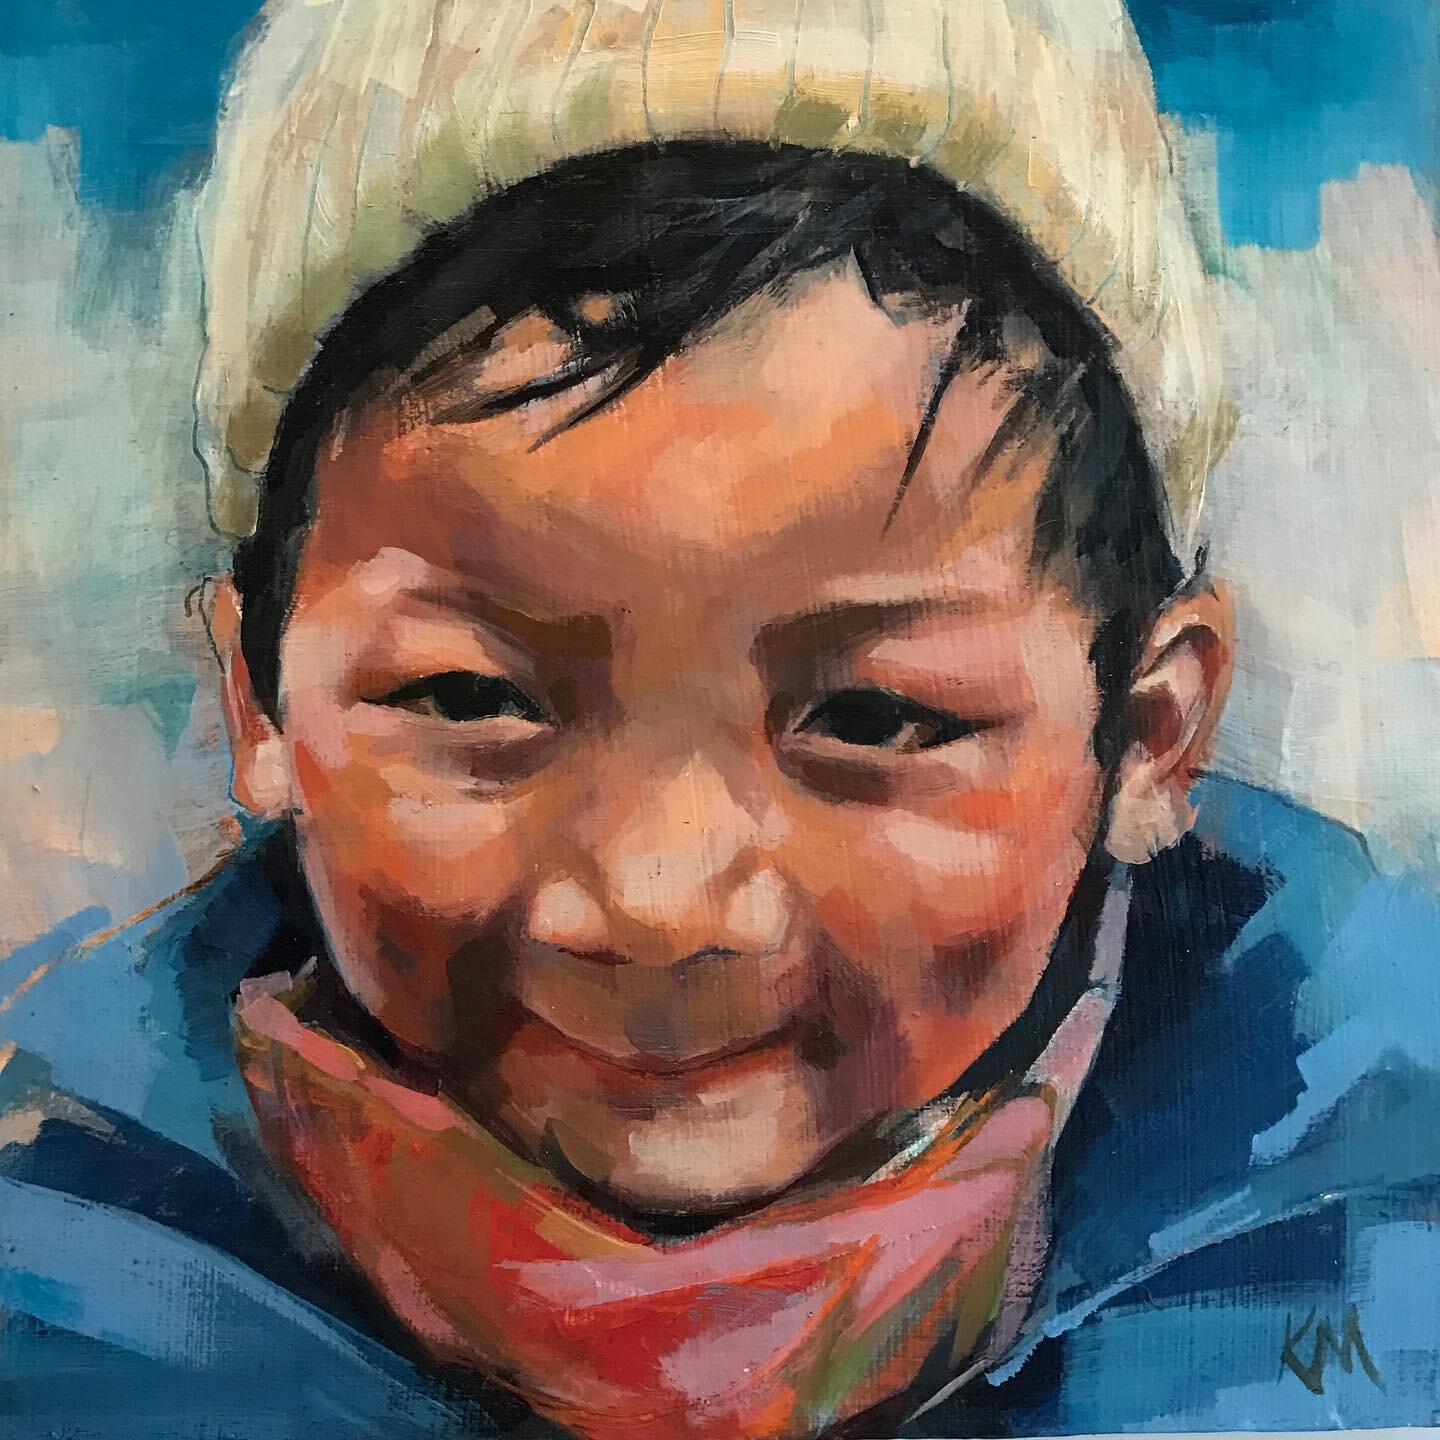 Last year we had the amazing opportunity to live in Nepal for 7 months, during a time when so few people could travel let alone trek in the Himalayas. This little guy was from Namche Bazaar, a town on the way to Everest. He spent the day with a bottl